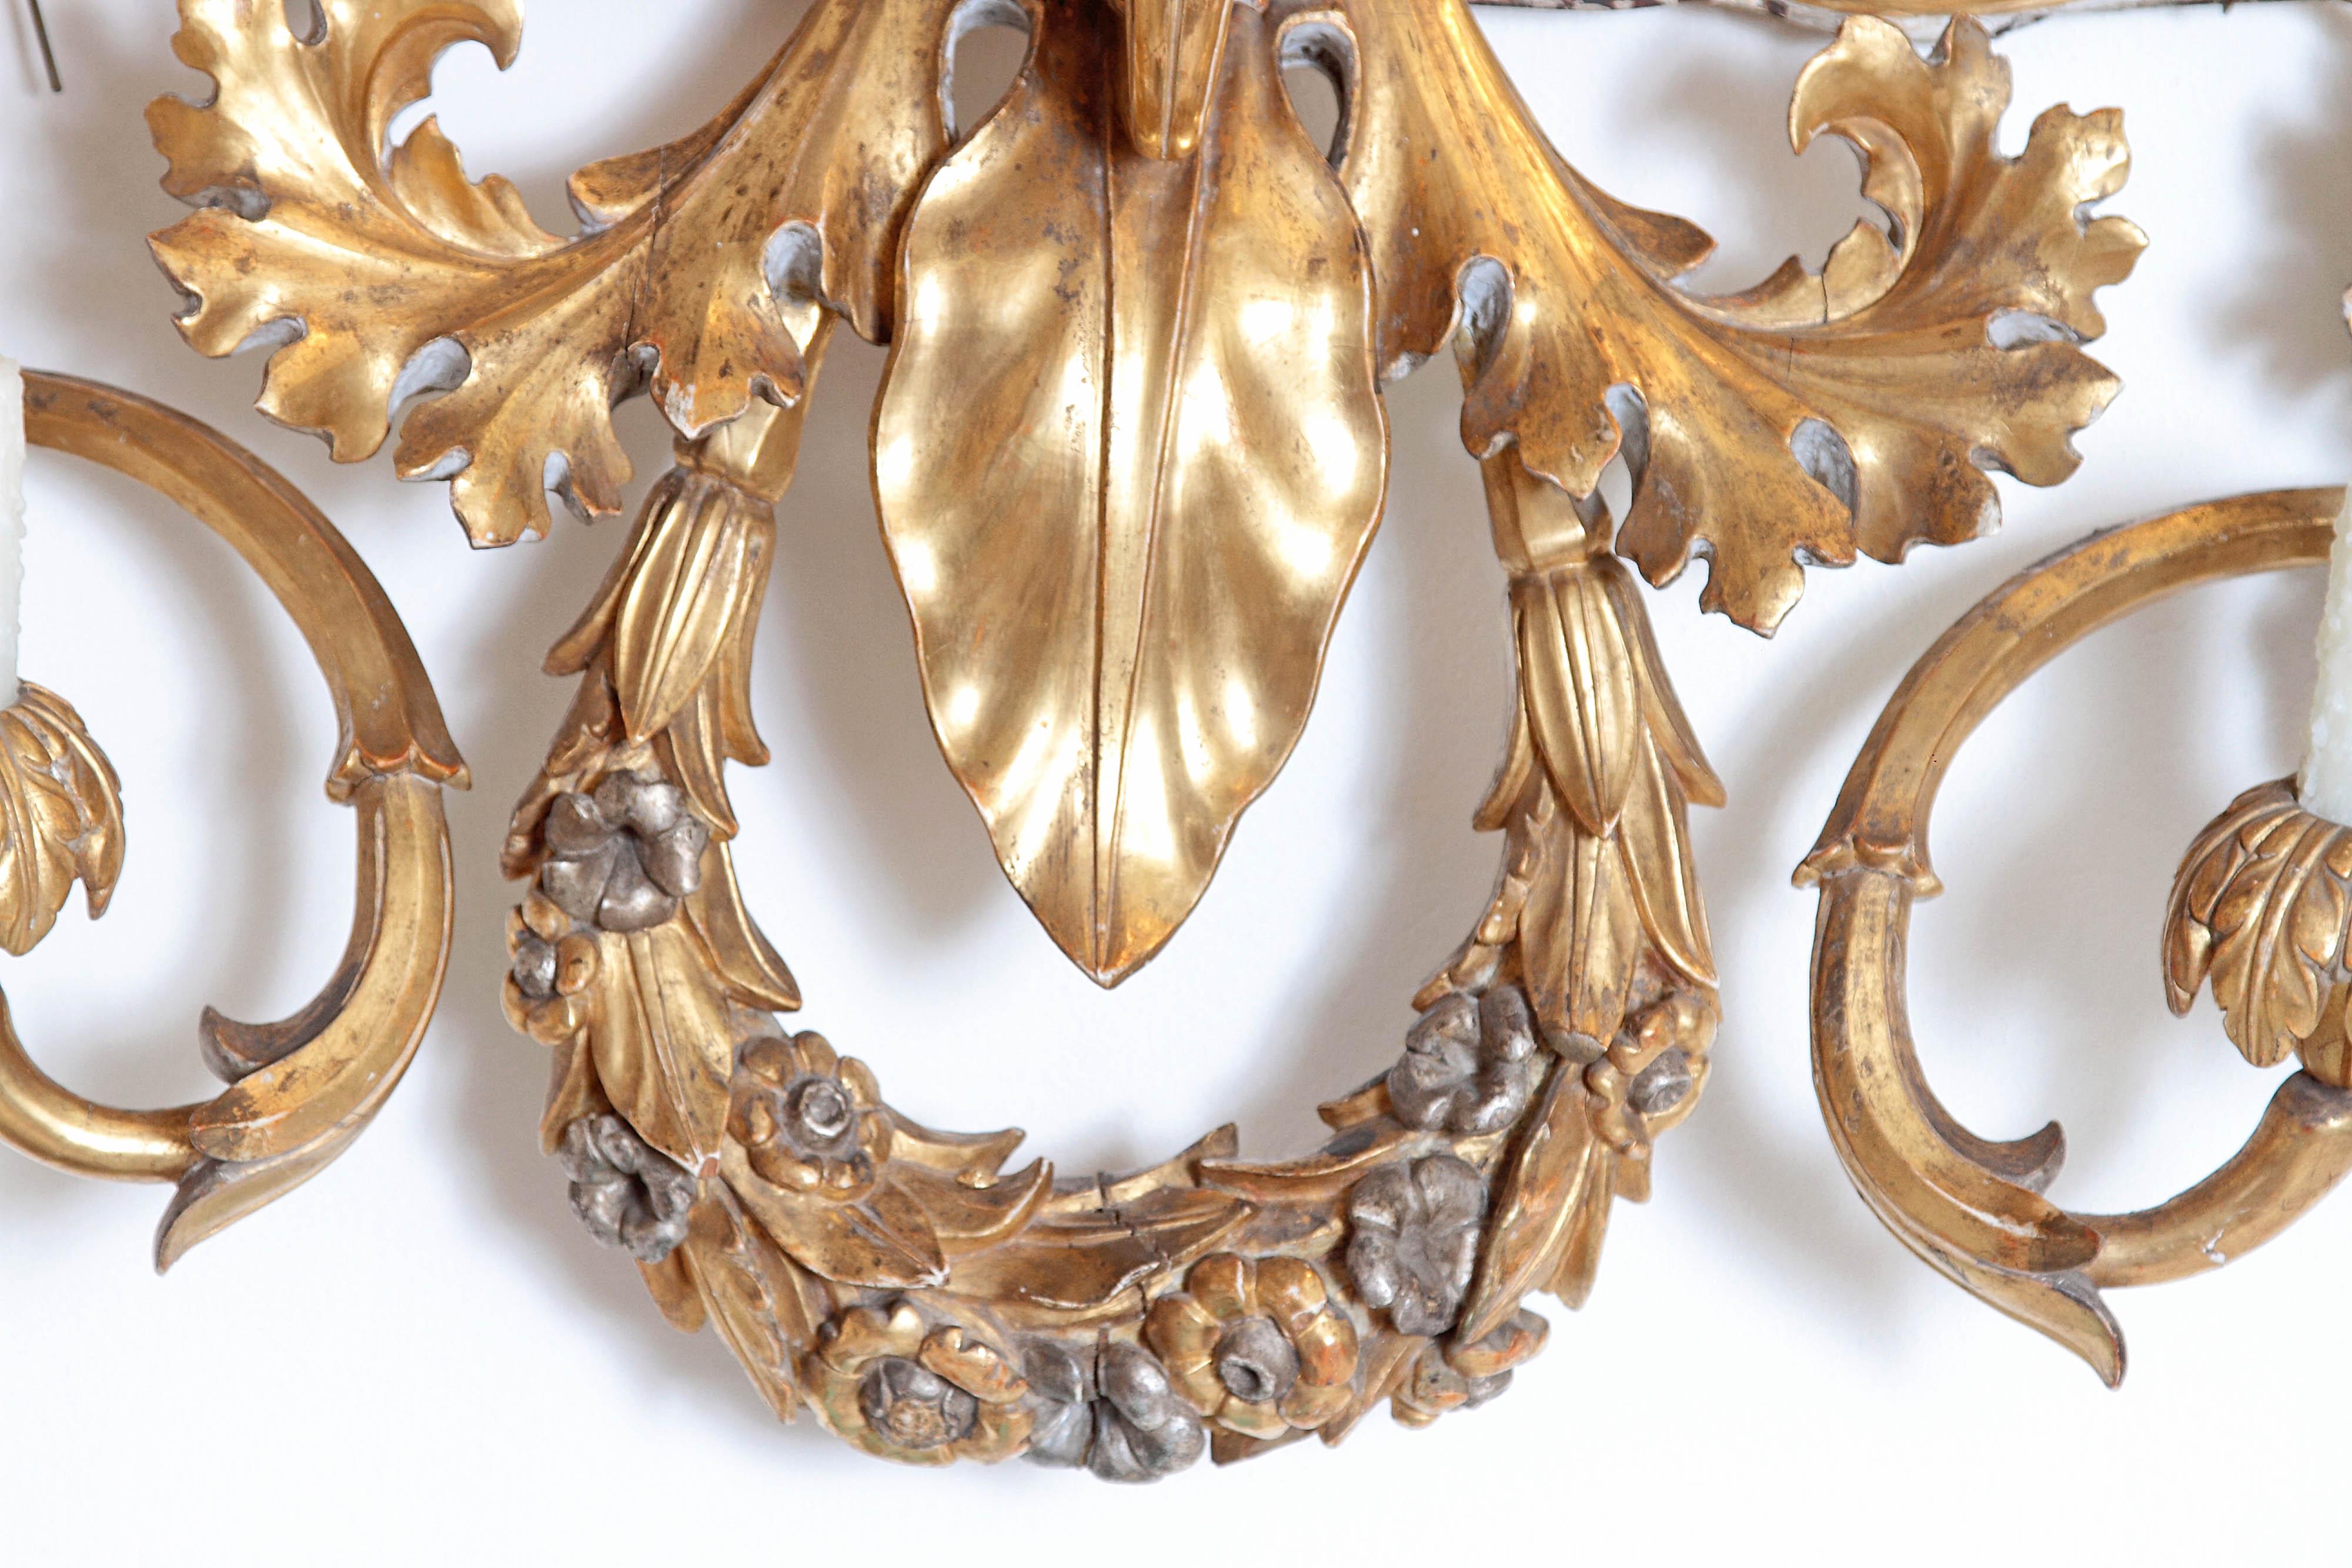 19th Century Oversized Italian Baroque Style Seven-Arm Gilt and Silvered Wood Wall Sconce